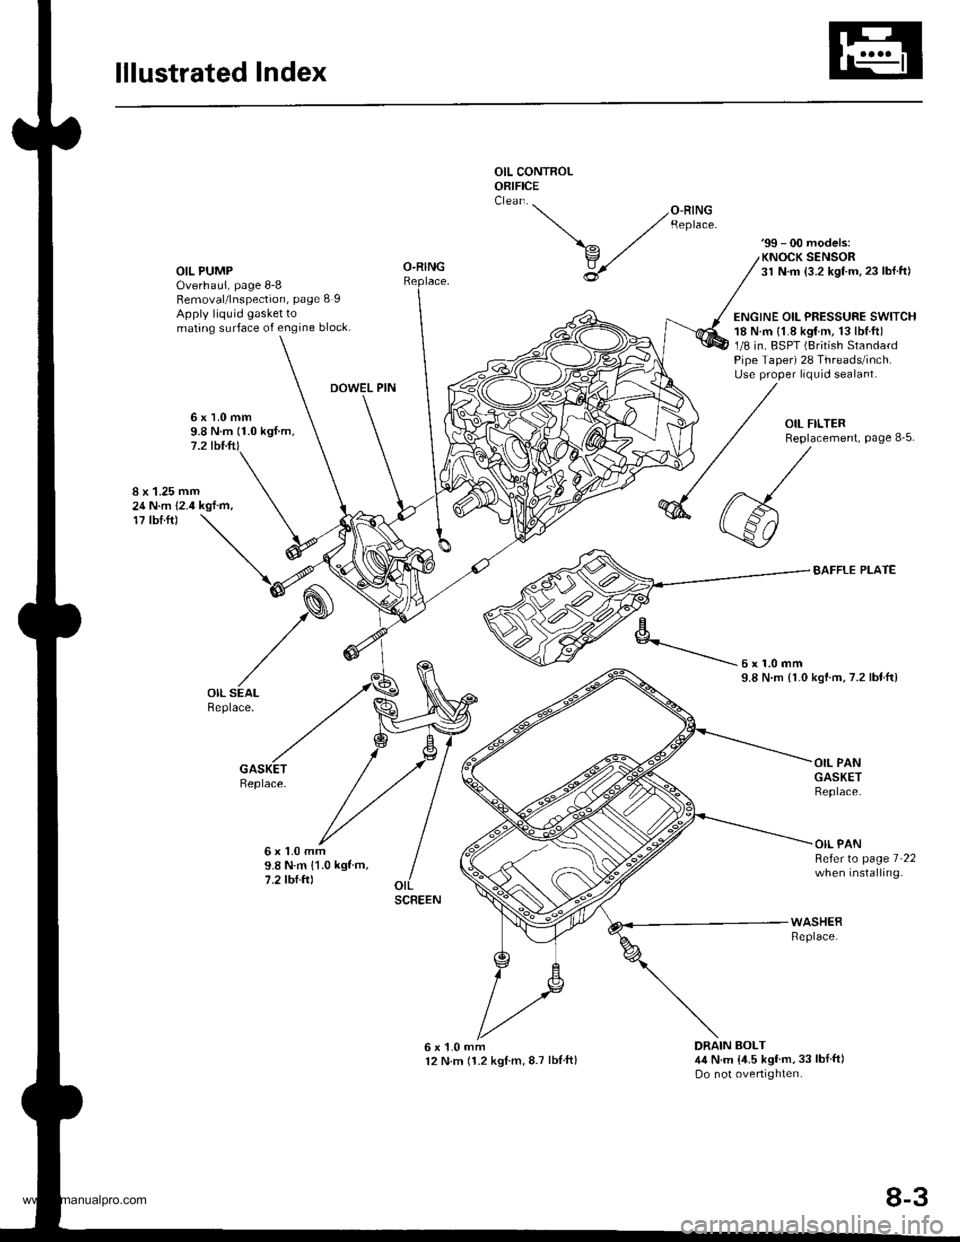 HONDA CR-V 1998 RD1-RD3 / 1.G Workshop Manual 
lllustrated Index
OIL CONTROLORIFICE
OIL PUMPOverhaul, page 8-8Removal/lnspection, page 8 IApply liquid gasket tomating surface of engine block.
99 - 00 models:KNOCK SENSOR31 N.m {3.2 kgf.m.23 lbl.f